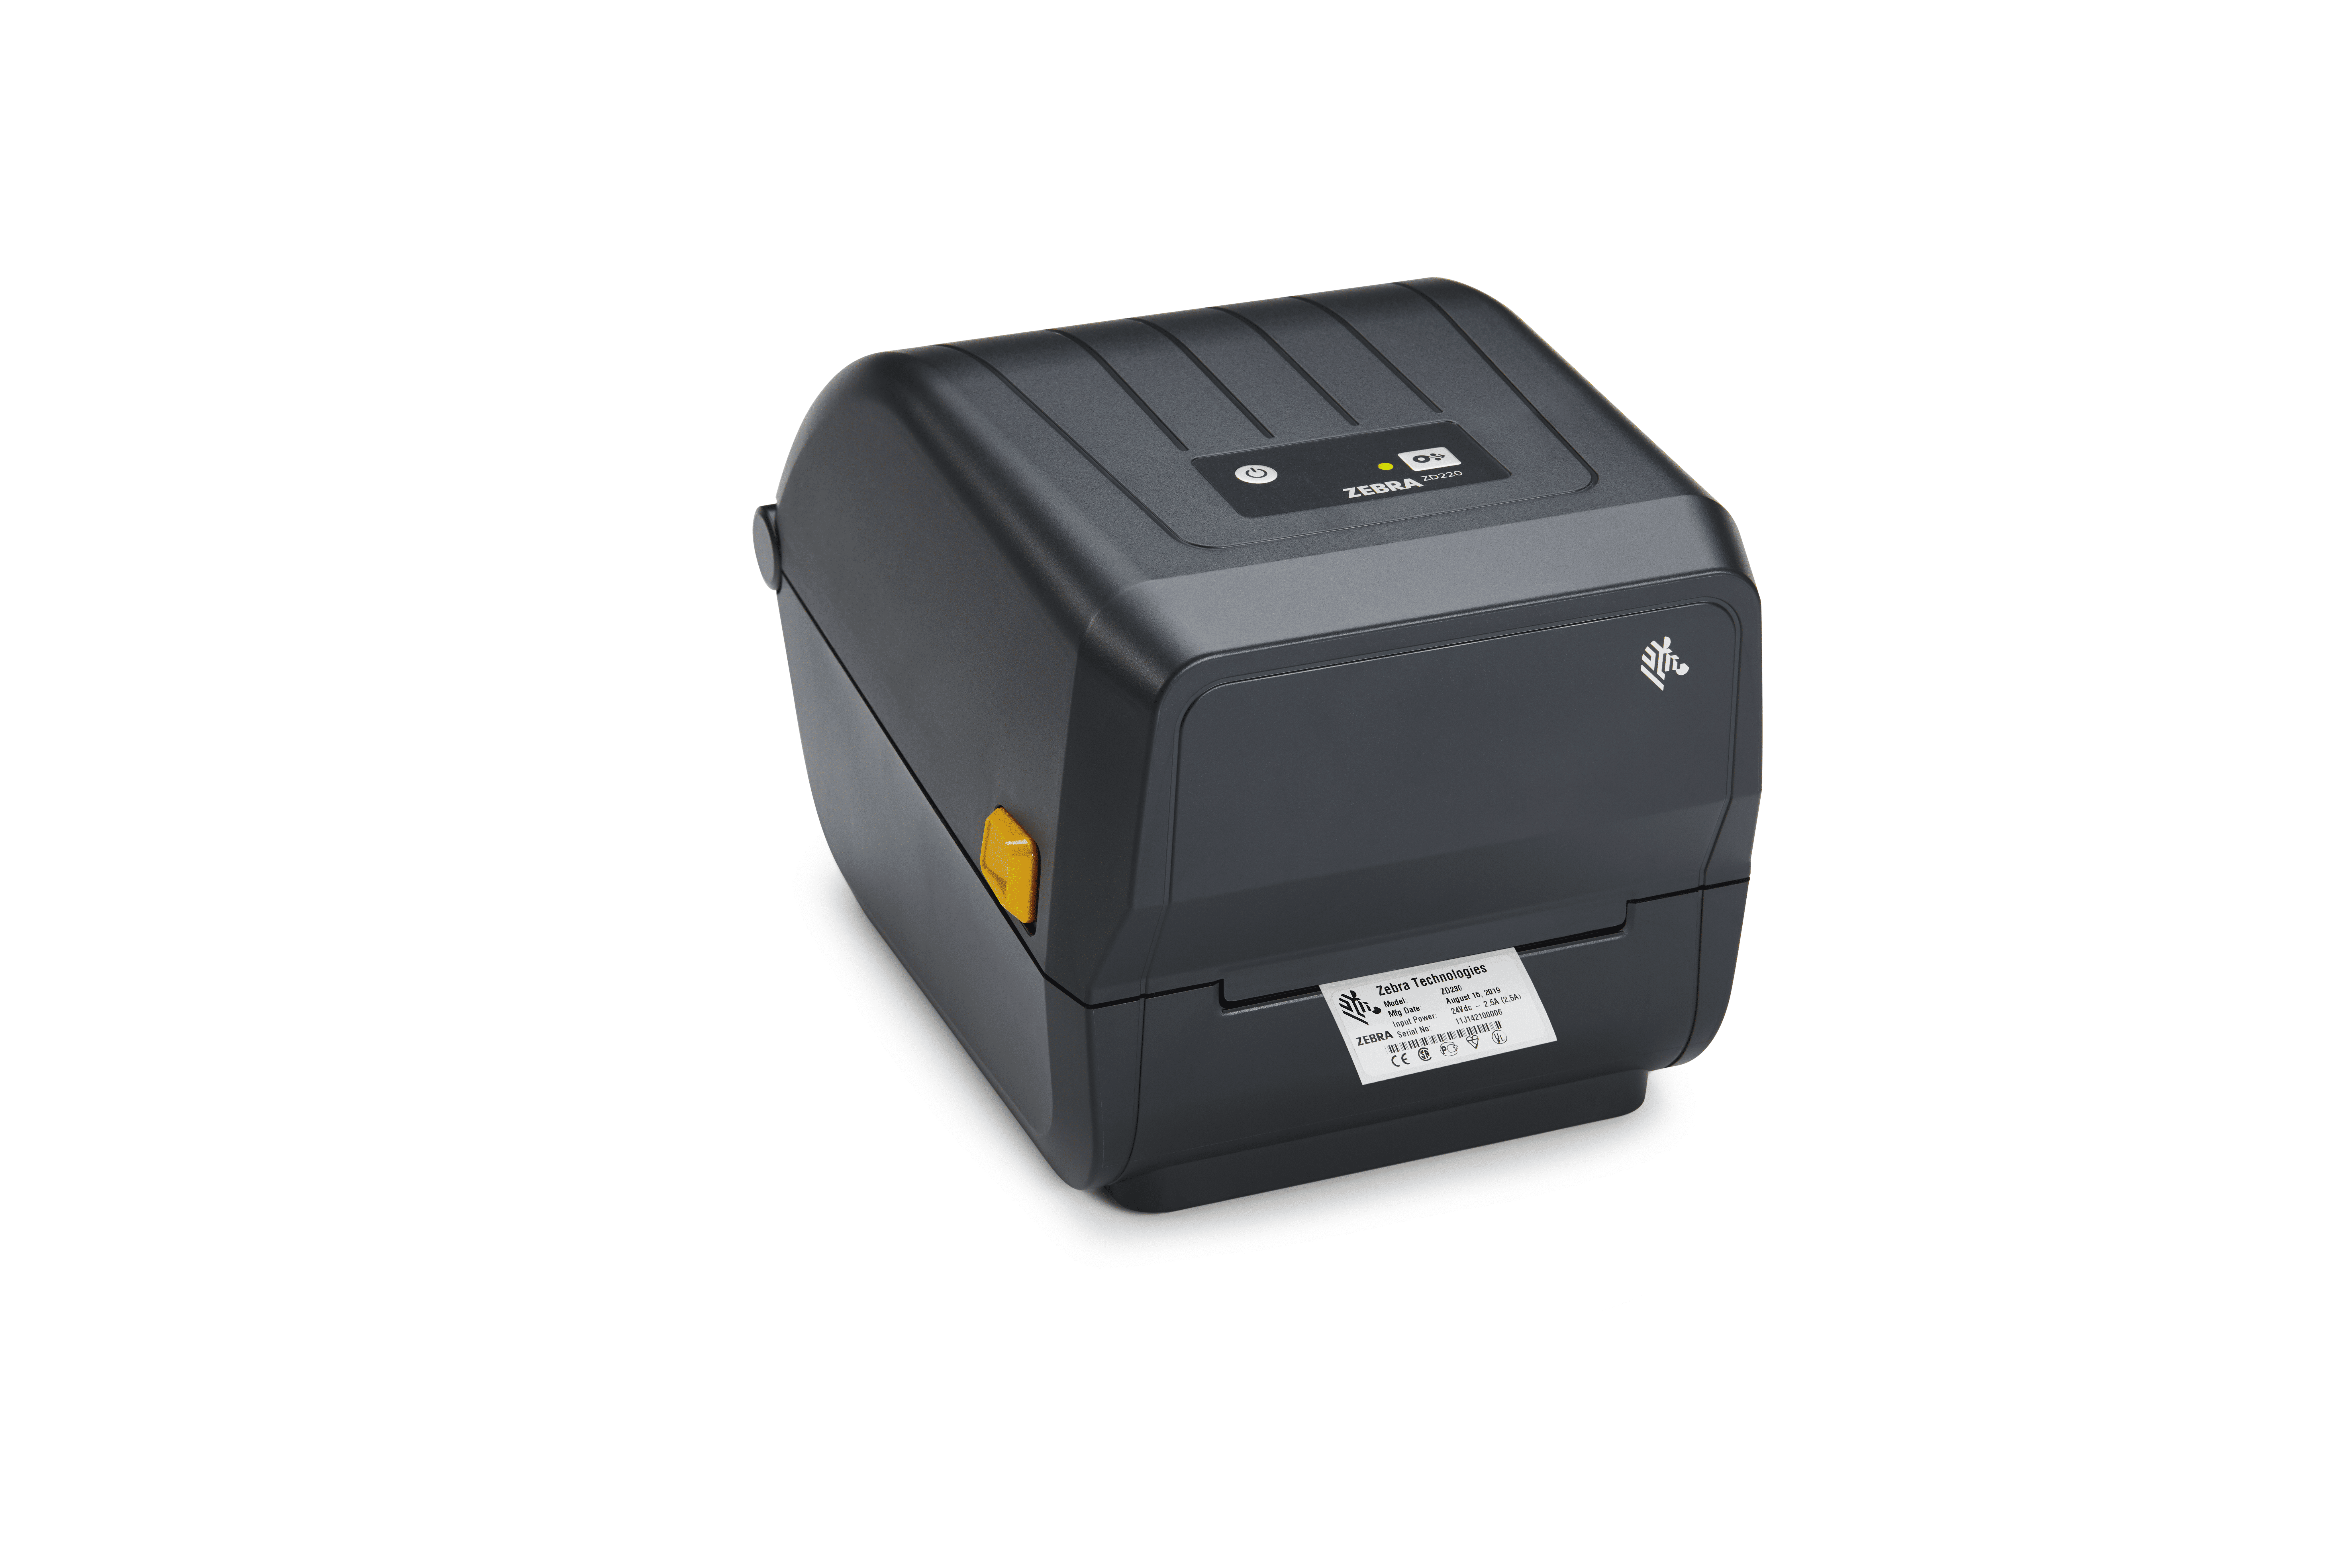 Zd220 Printer Drivers - Zebra Zd230 Zd220 User Manual : It gives full functionality for the ...